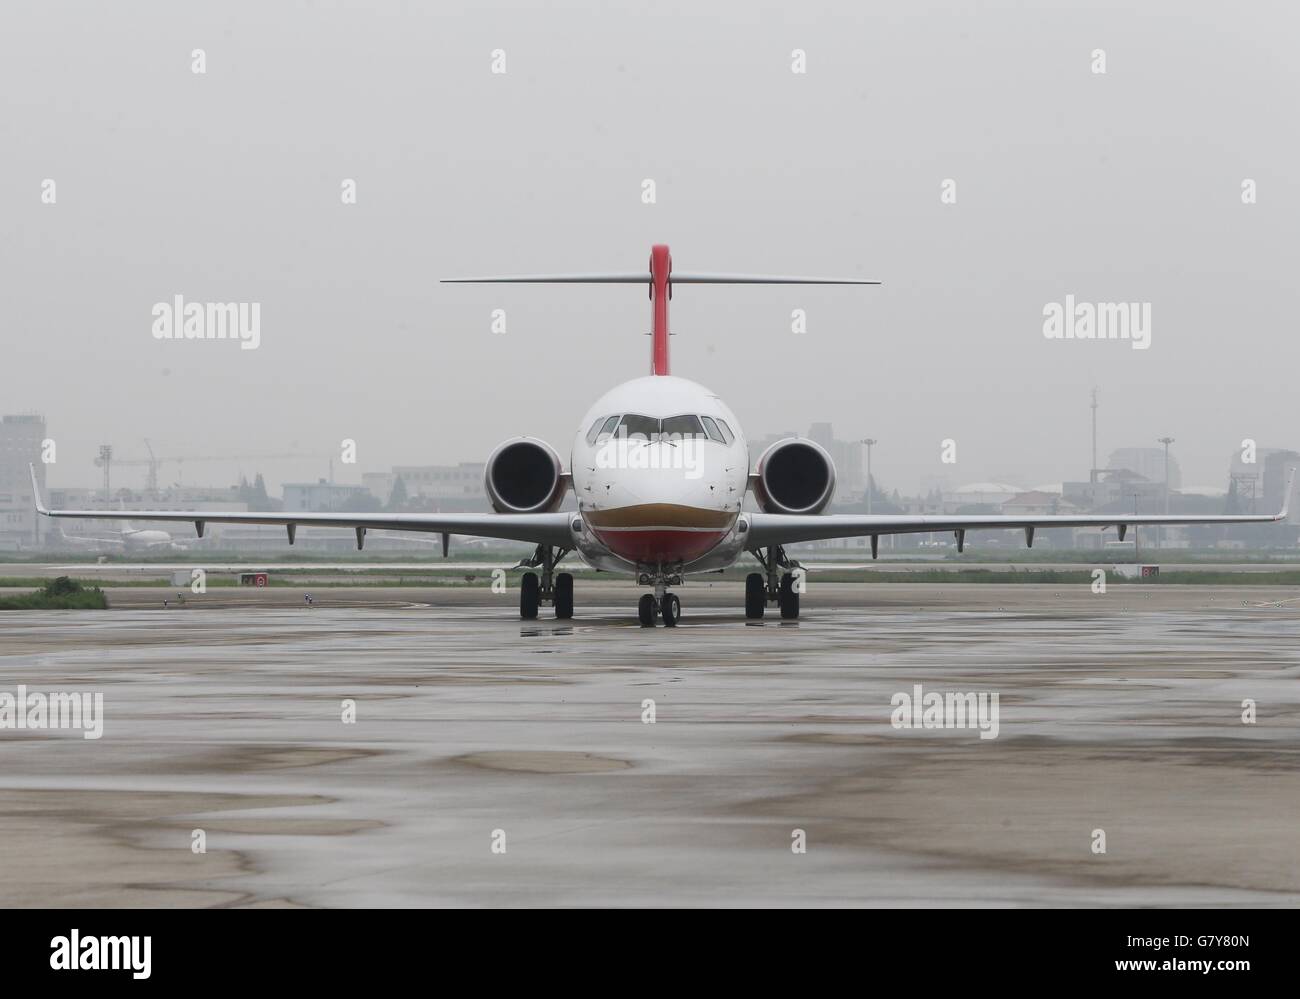 Shanghai, China. 28th June, 2016. Chengdu Airlines ARJ21-700 arrives at Hongqiao International Airport in Shanghai, east China, June 28, 2016. ARJ21, manufactured by the Commercial Aircraft Corp. of China (COMAC), made its maiden commercial flight from Chengdu, captial of southwest China's Sichuan Province, to Shanghai on Tuesday. The domestically-designed airliner is China's first regional jet manufactured according to international standards. © Pei Xin/Xinhua/Alamy Live News Stock Photo